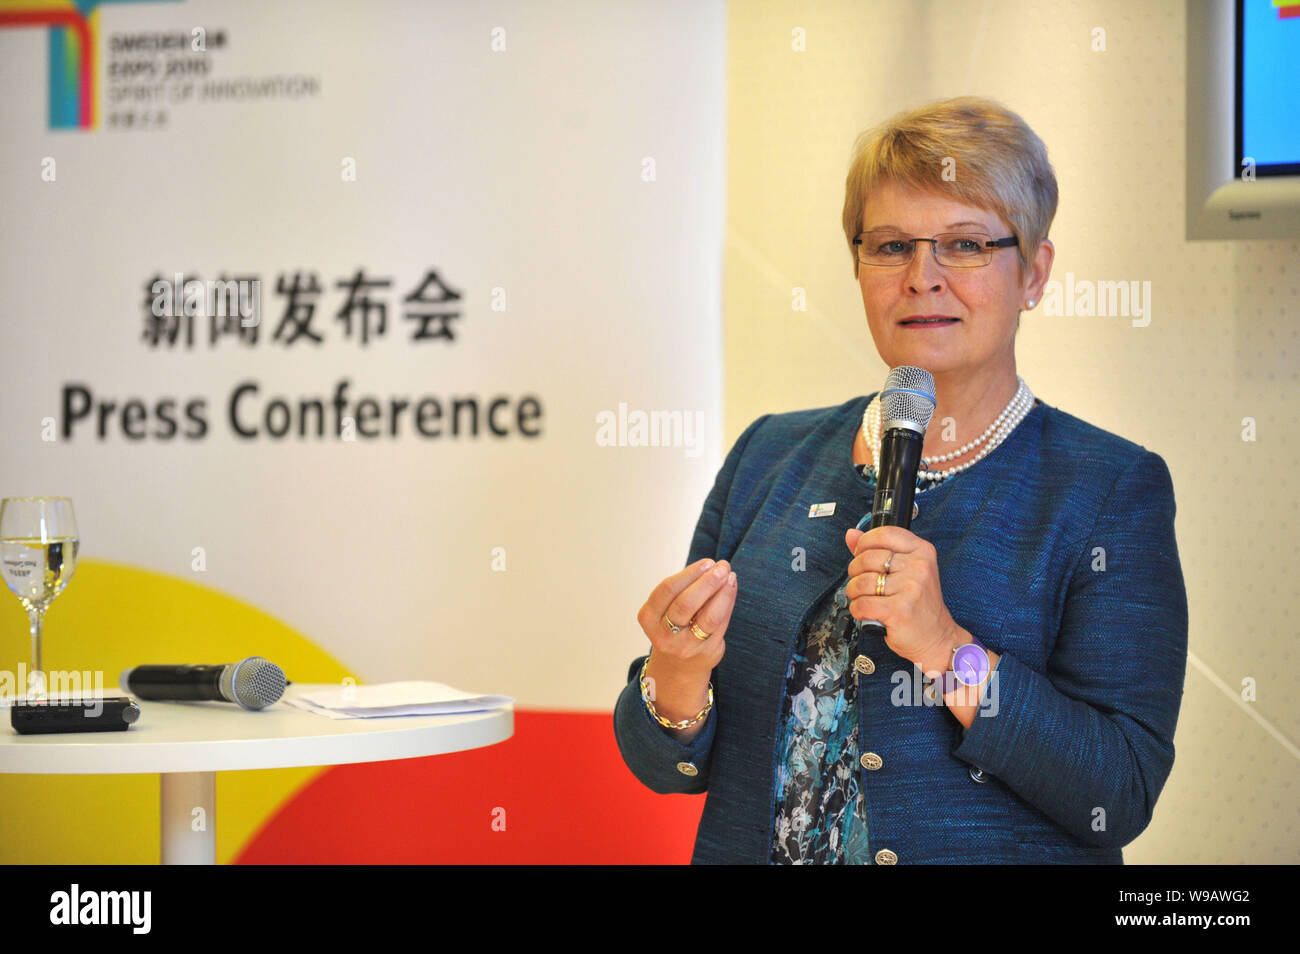 Swedish Deputy Prime Minister Maud Olofsson speaks during a press conference at the Sweden Pavilion in the Expo site in Shanghai, China, May 23, 2010. Stock Photo